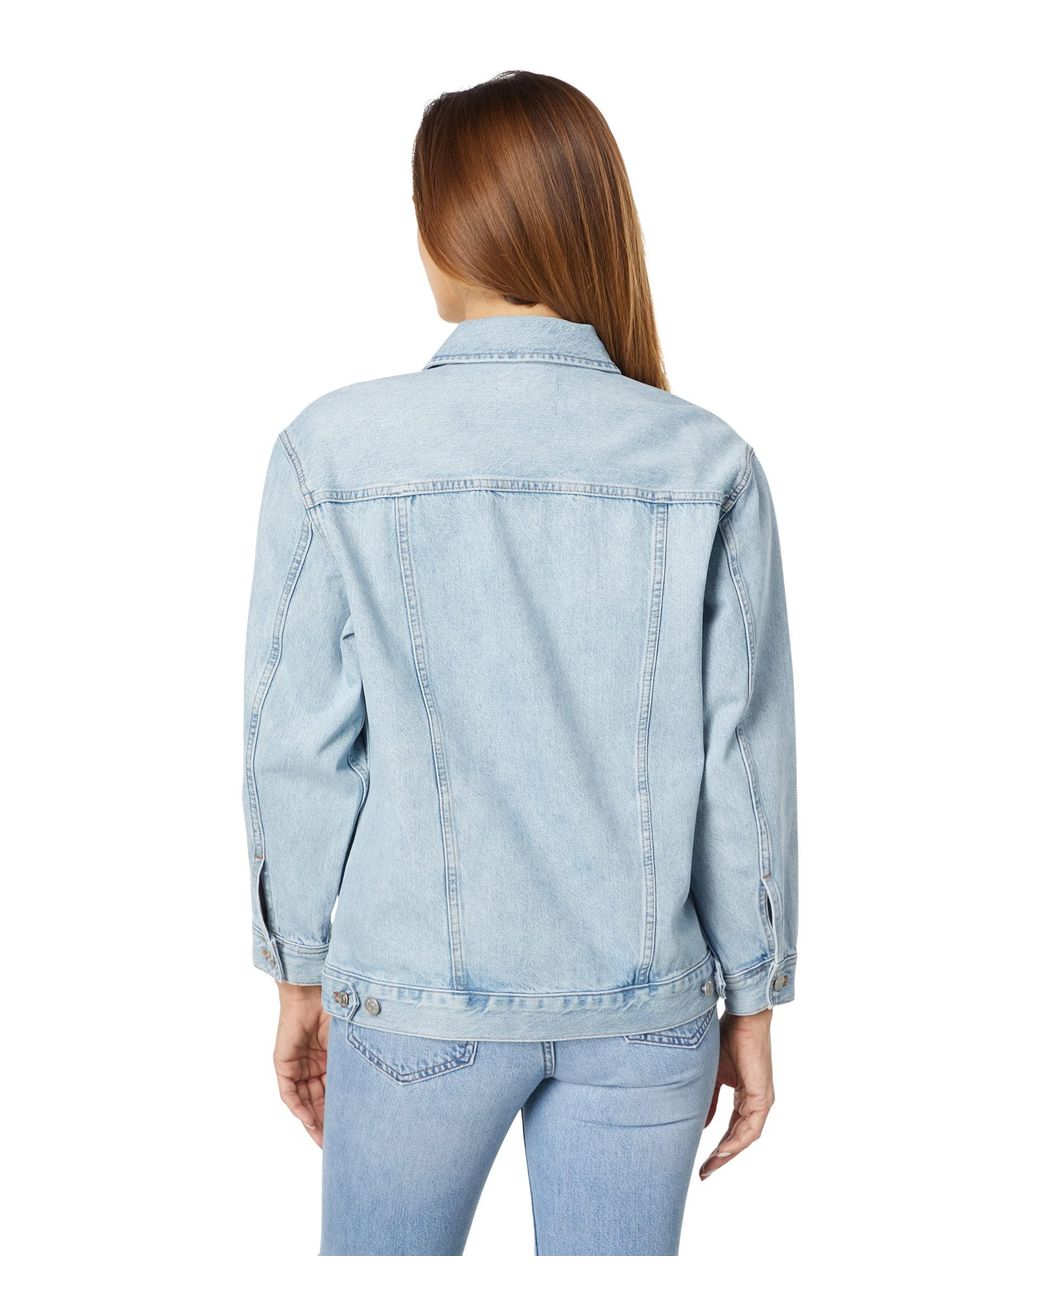 Madewell Cotton Oversized Trucker Jacket In Fitzgerald Wash in 